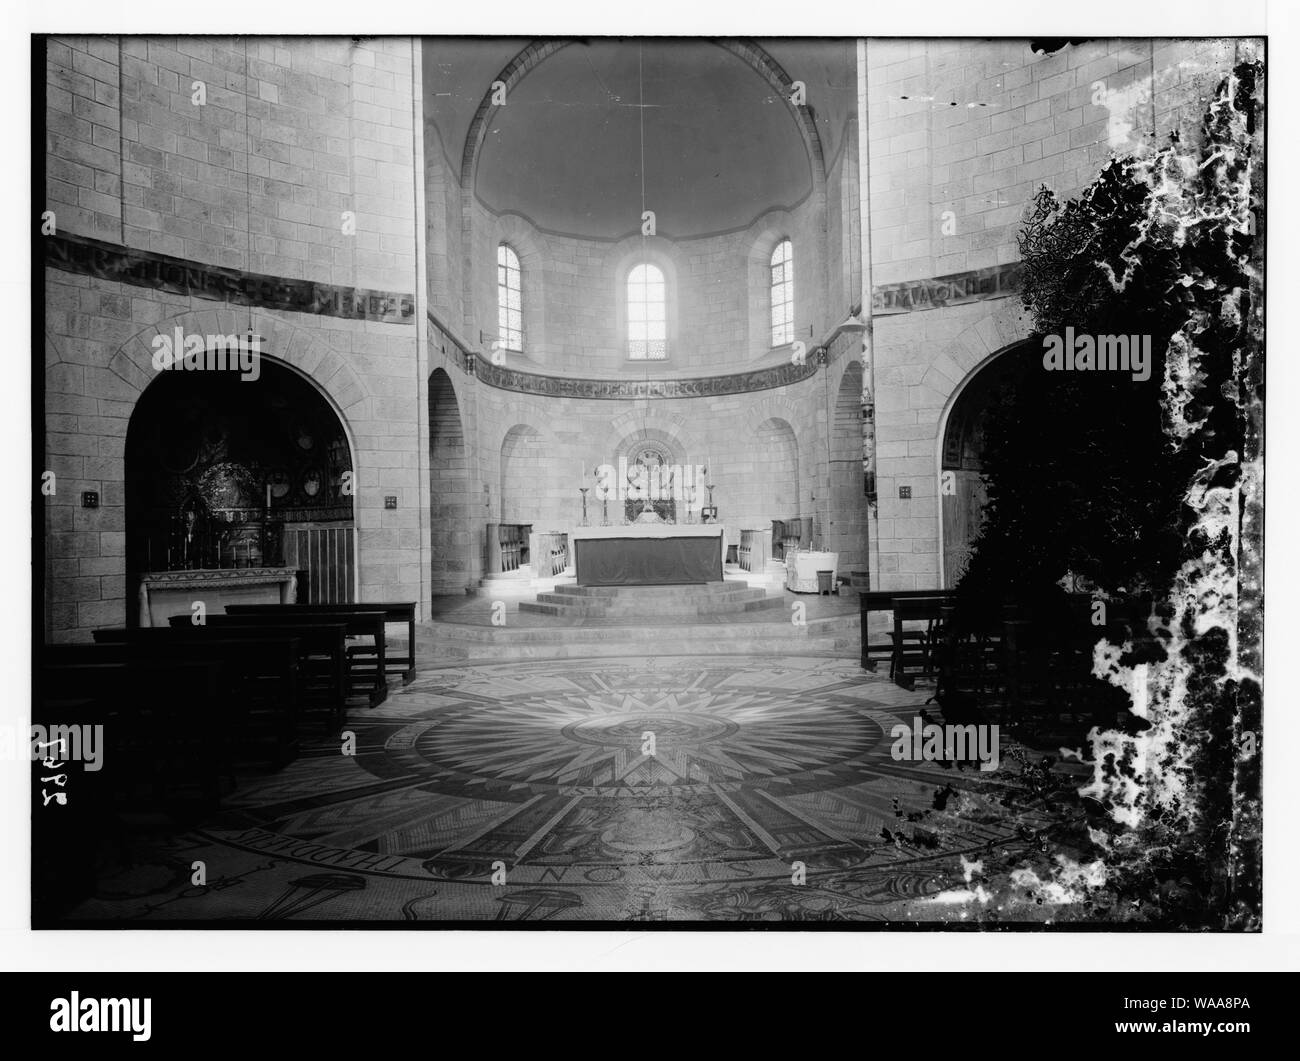 Church on the western hill, Zion. Church of the Dormition, Int[erior]. The main apse Stock Photo